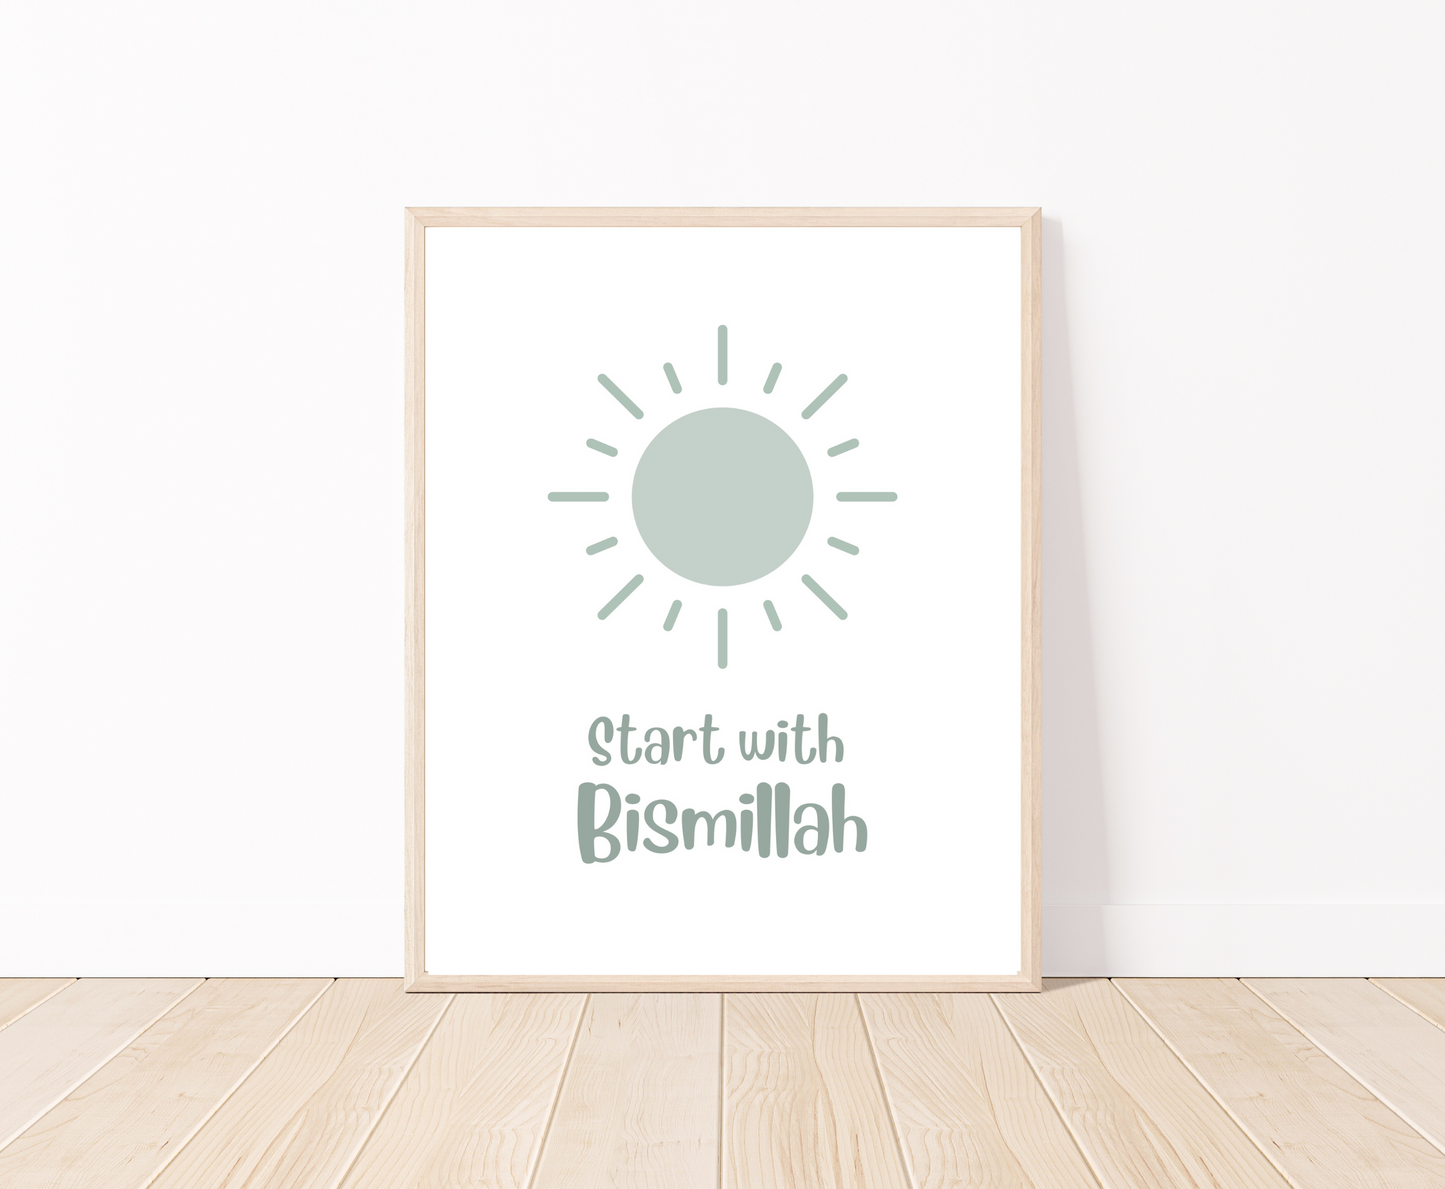 A digital poster that is placed on a white wall and parquet flooring shows a baby green sun with “Start with Bismillah” written right below.